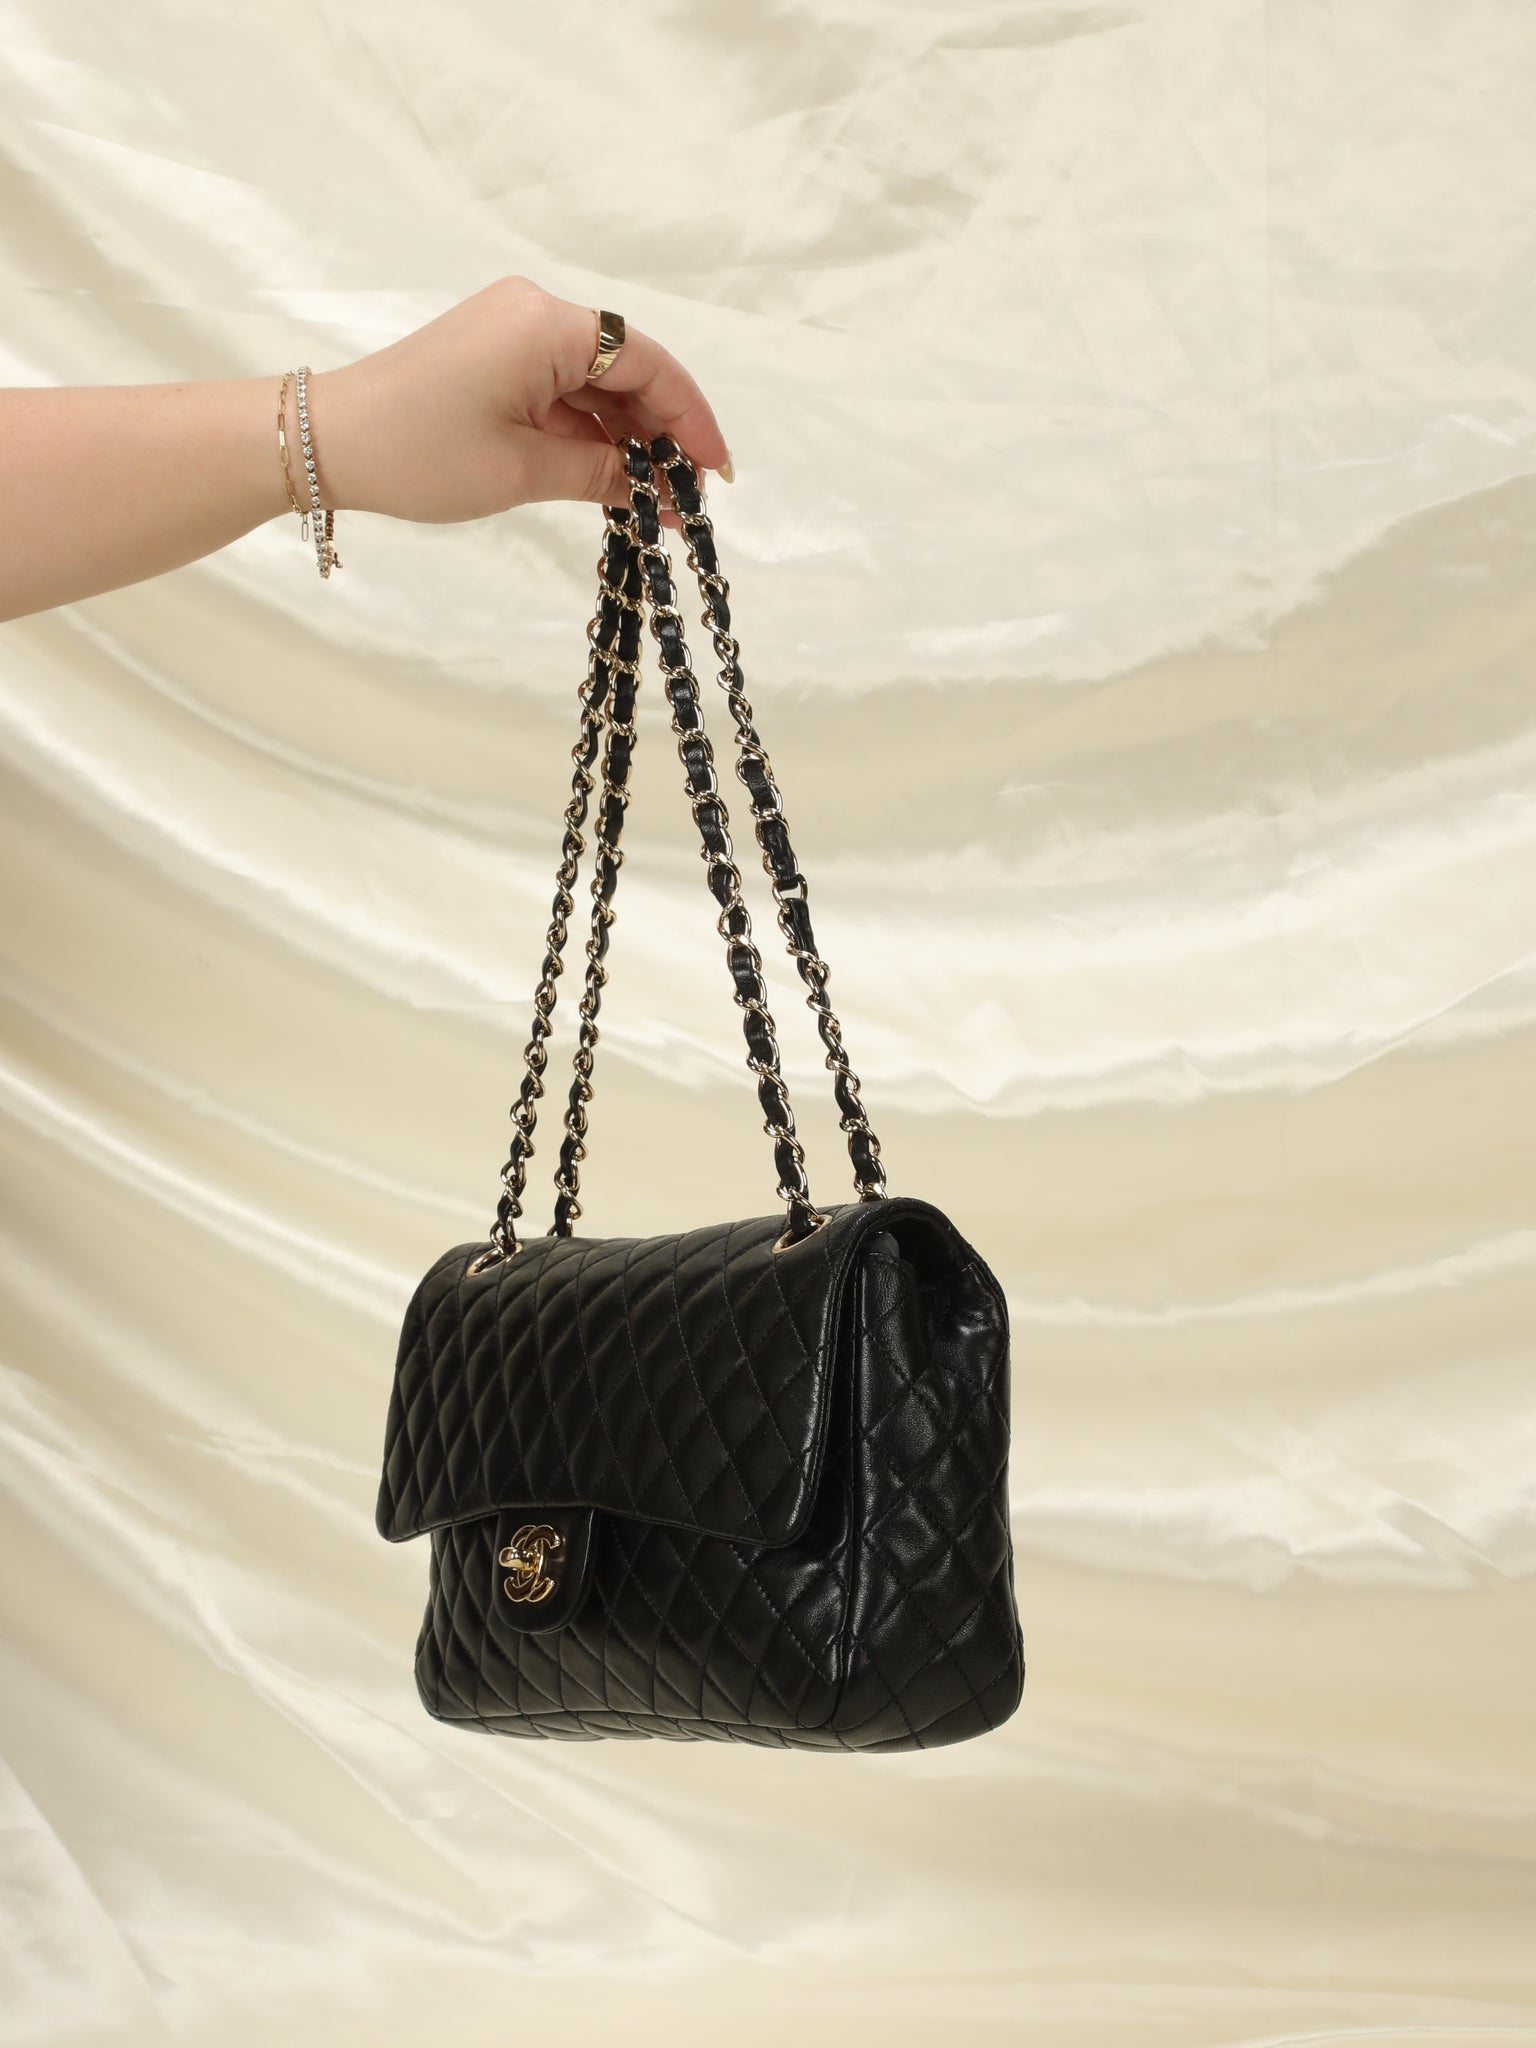 Chanel Lambskin Quilted Single Flap Bag – SFN